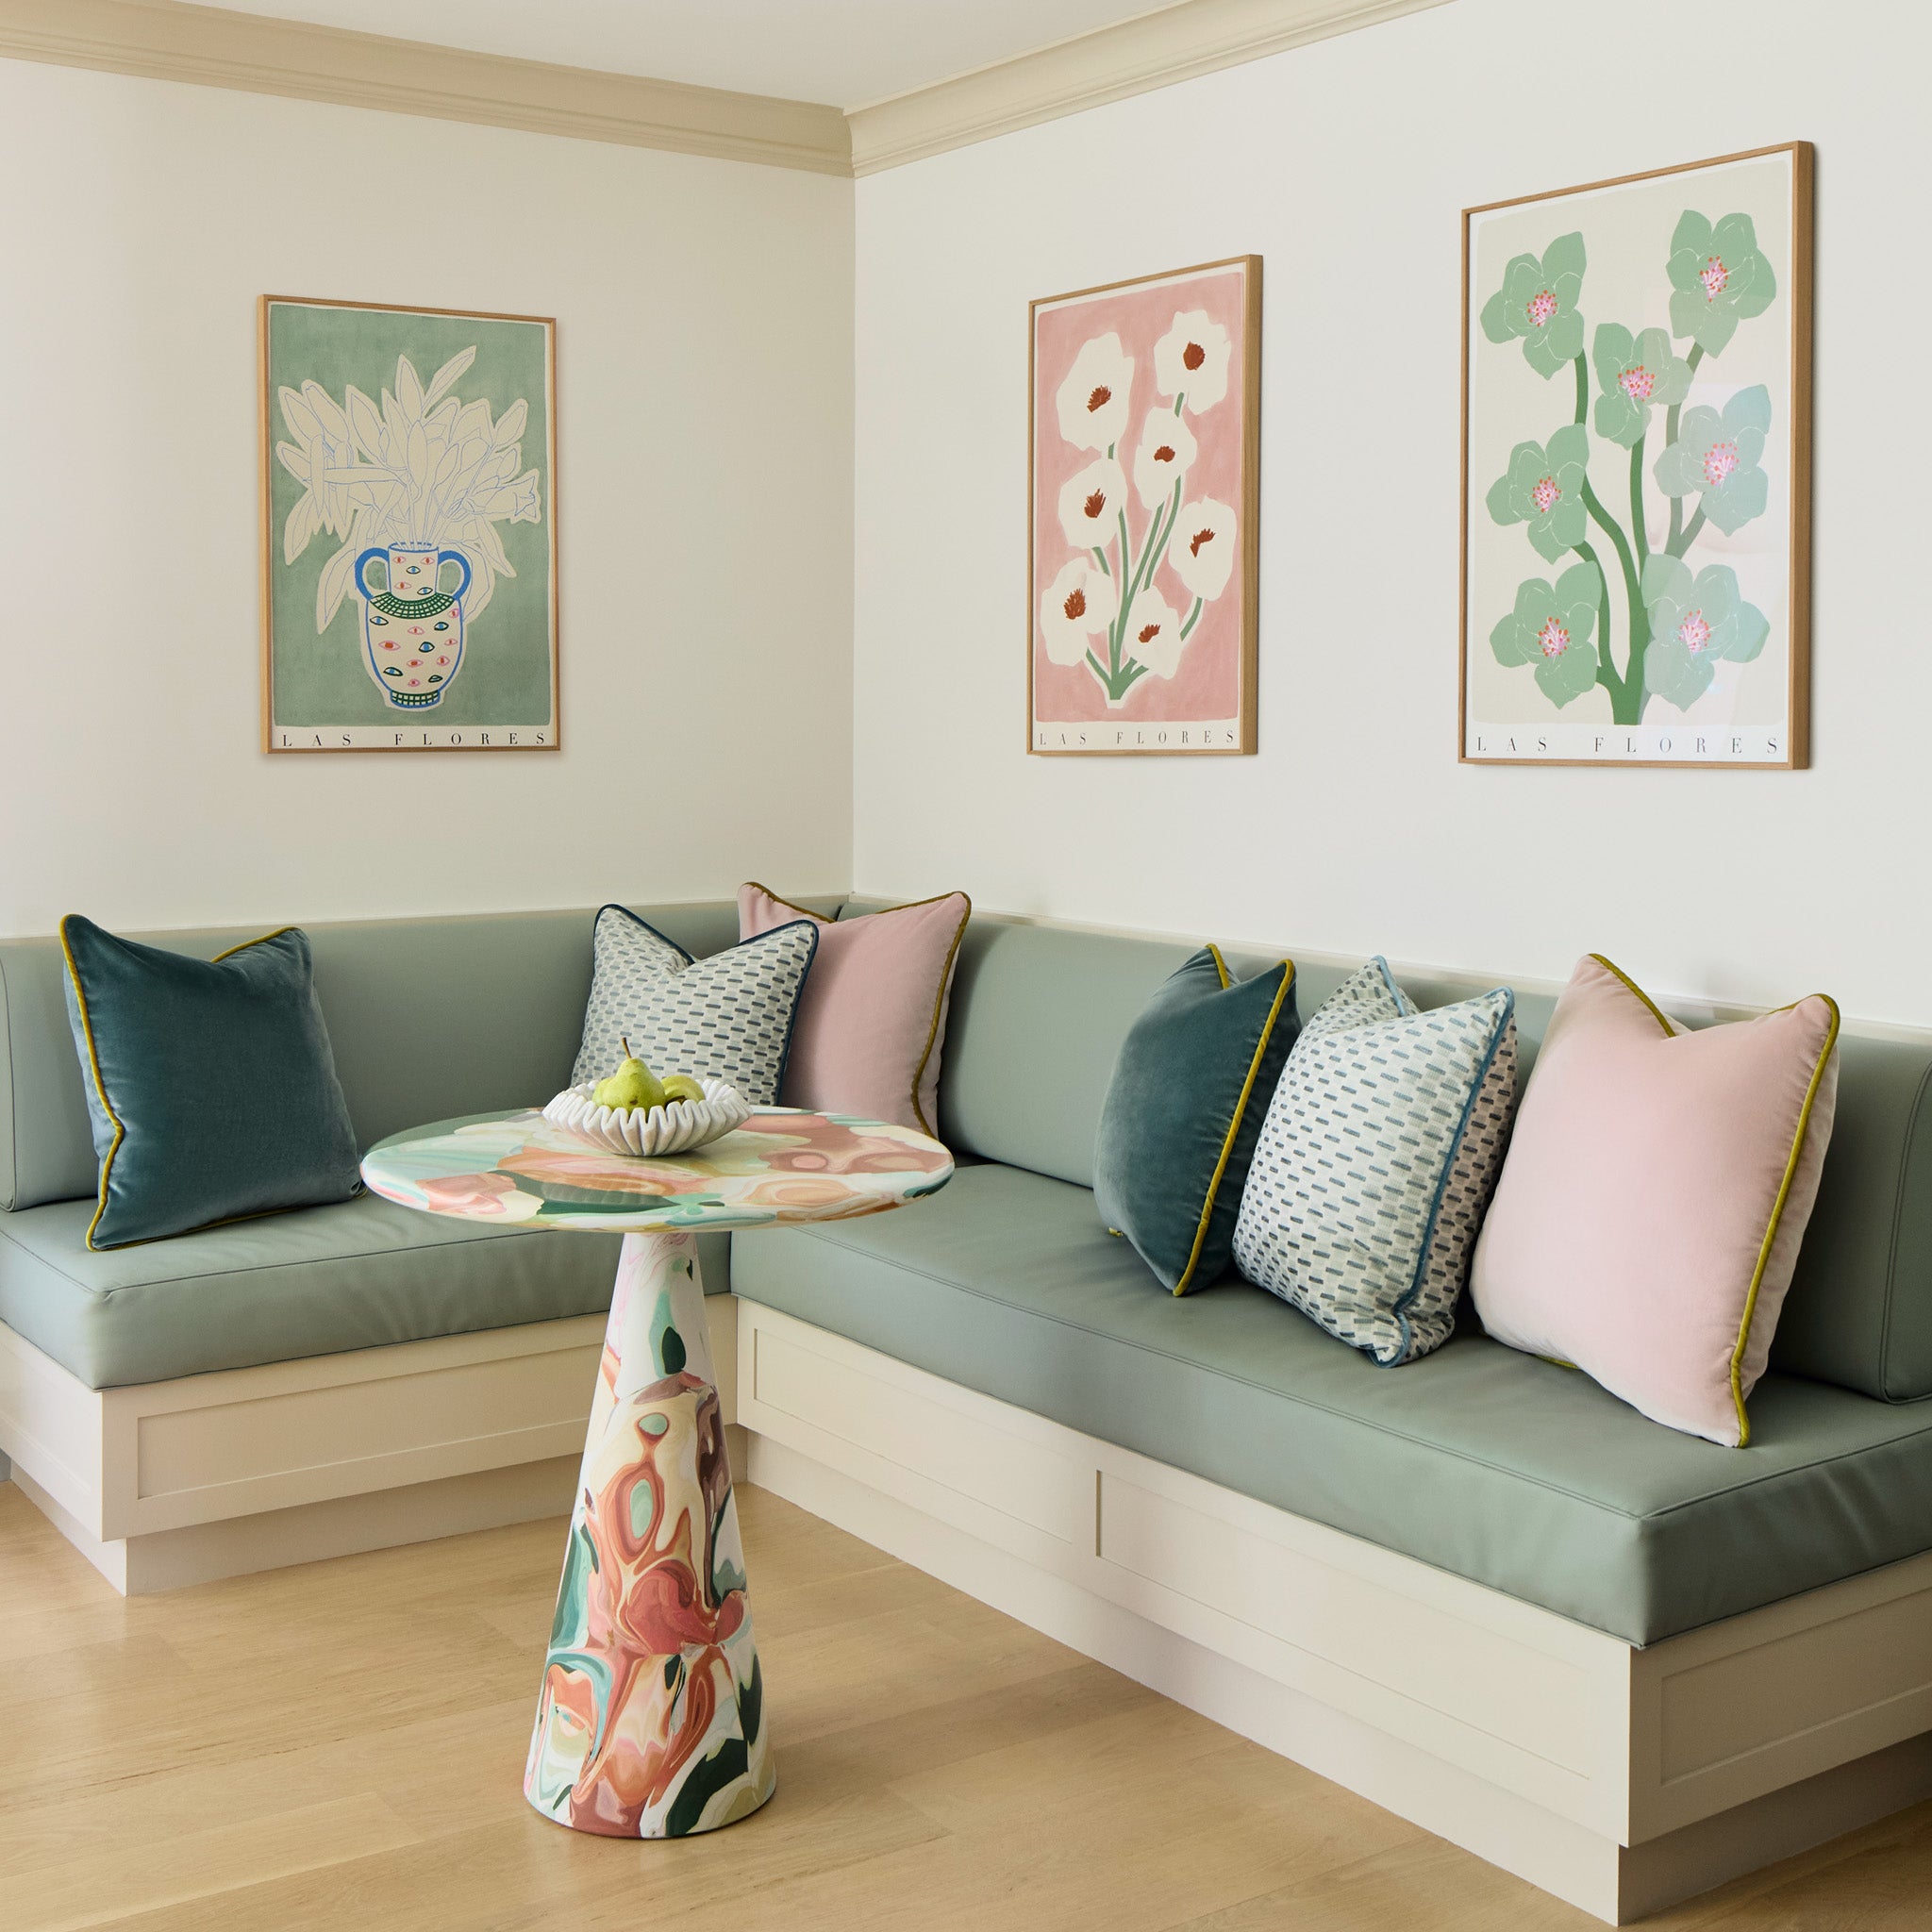 chenille and woven jacquard mint green geometric pillows on a cushioned bench with floral artwork above